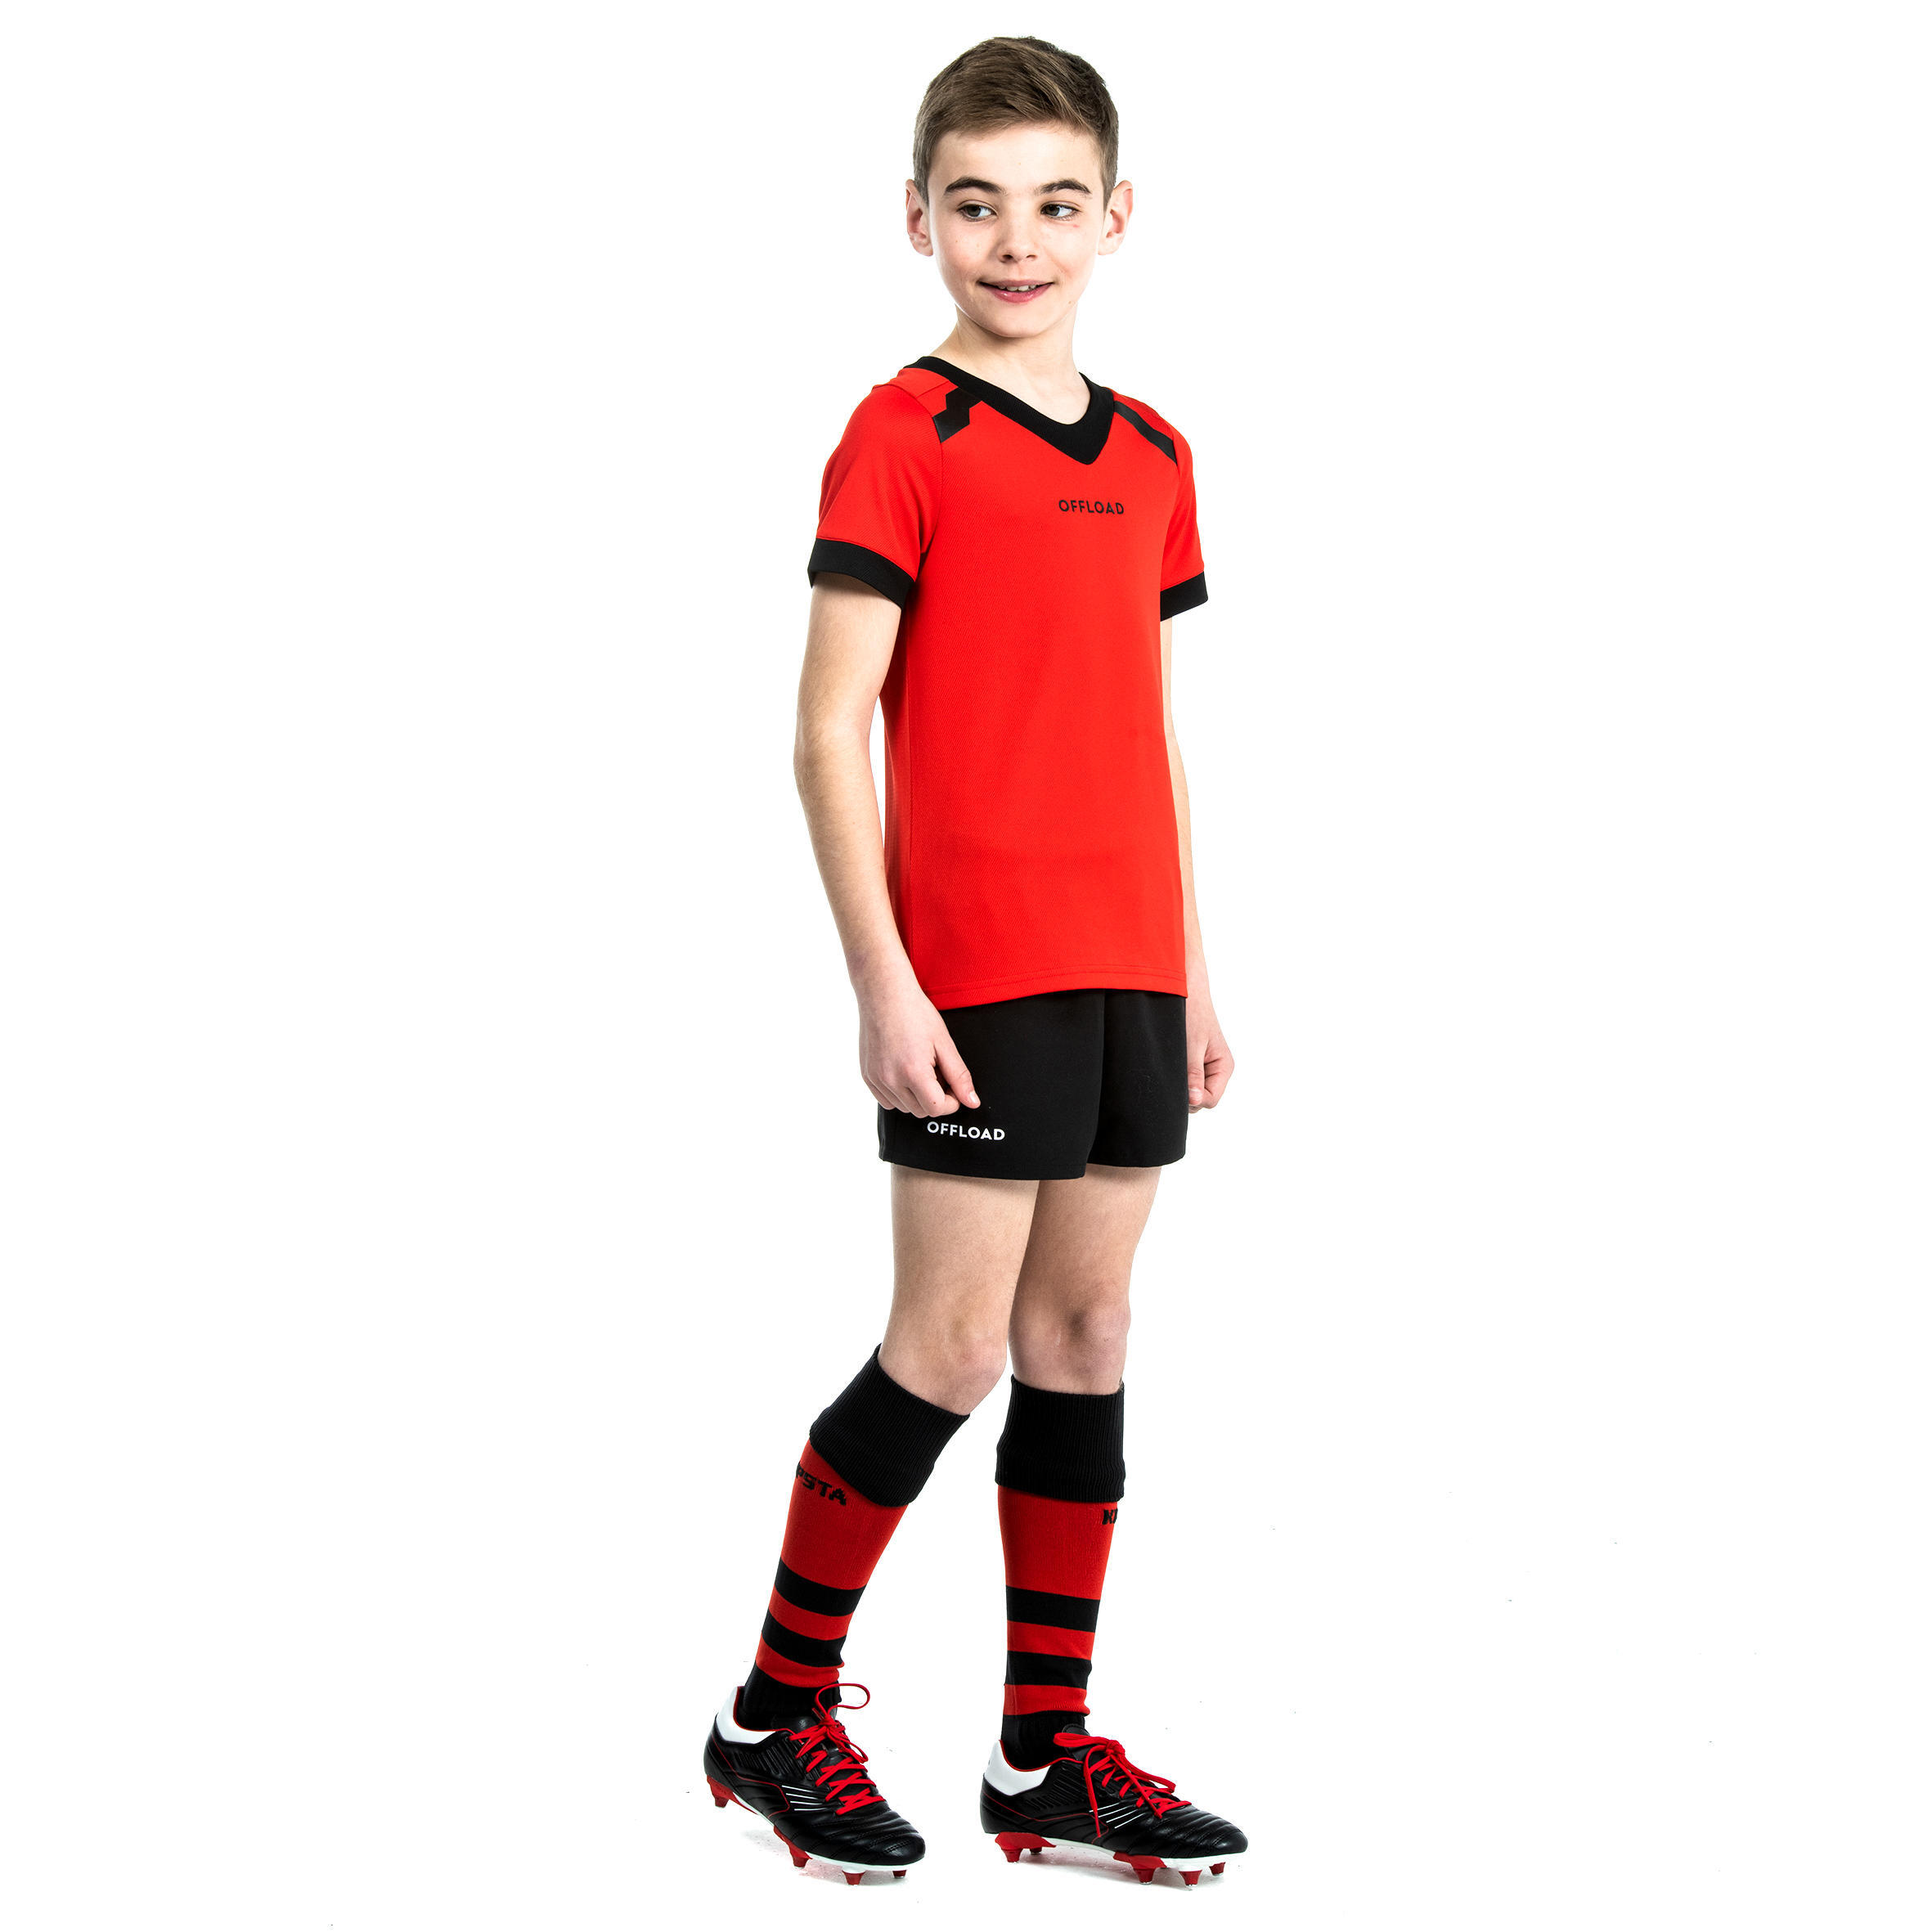 Kids' Rugby Shorts with Pockets R100 - Black 4/6